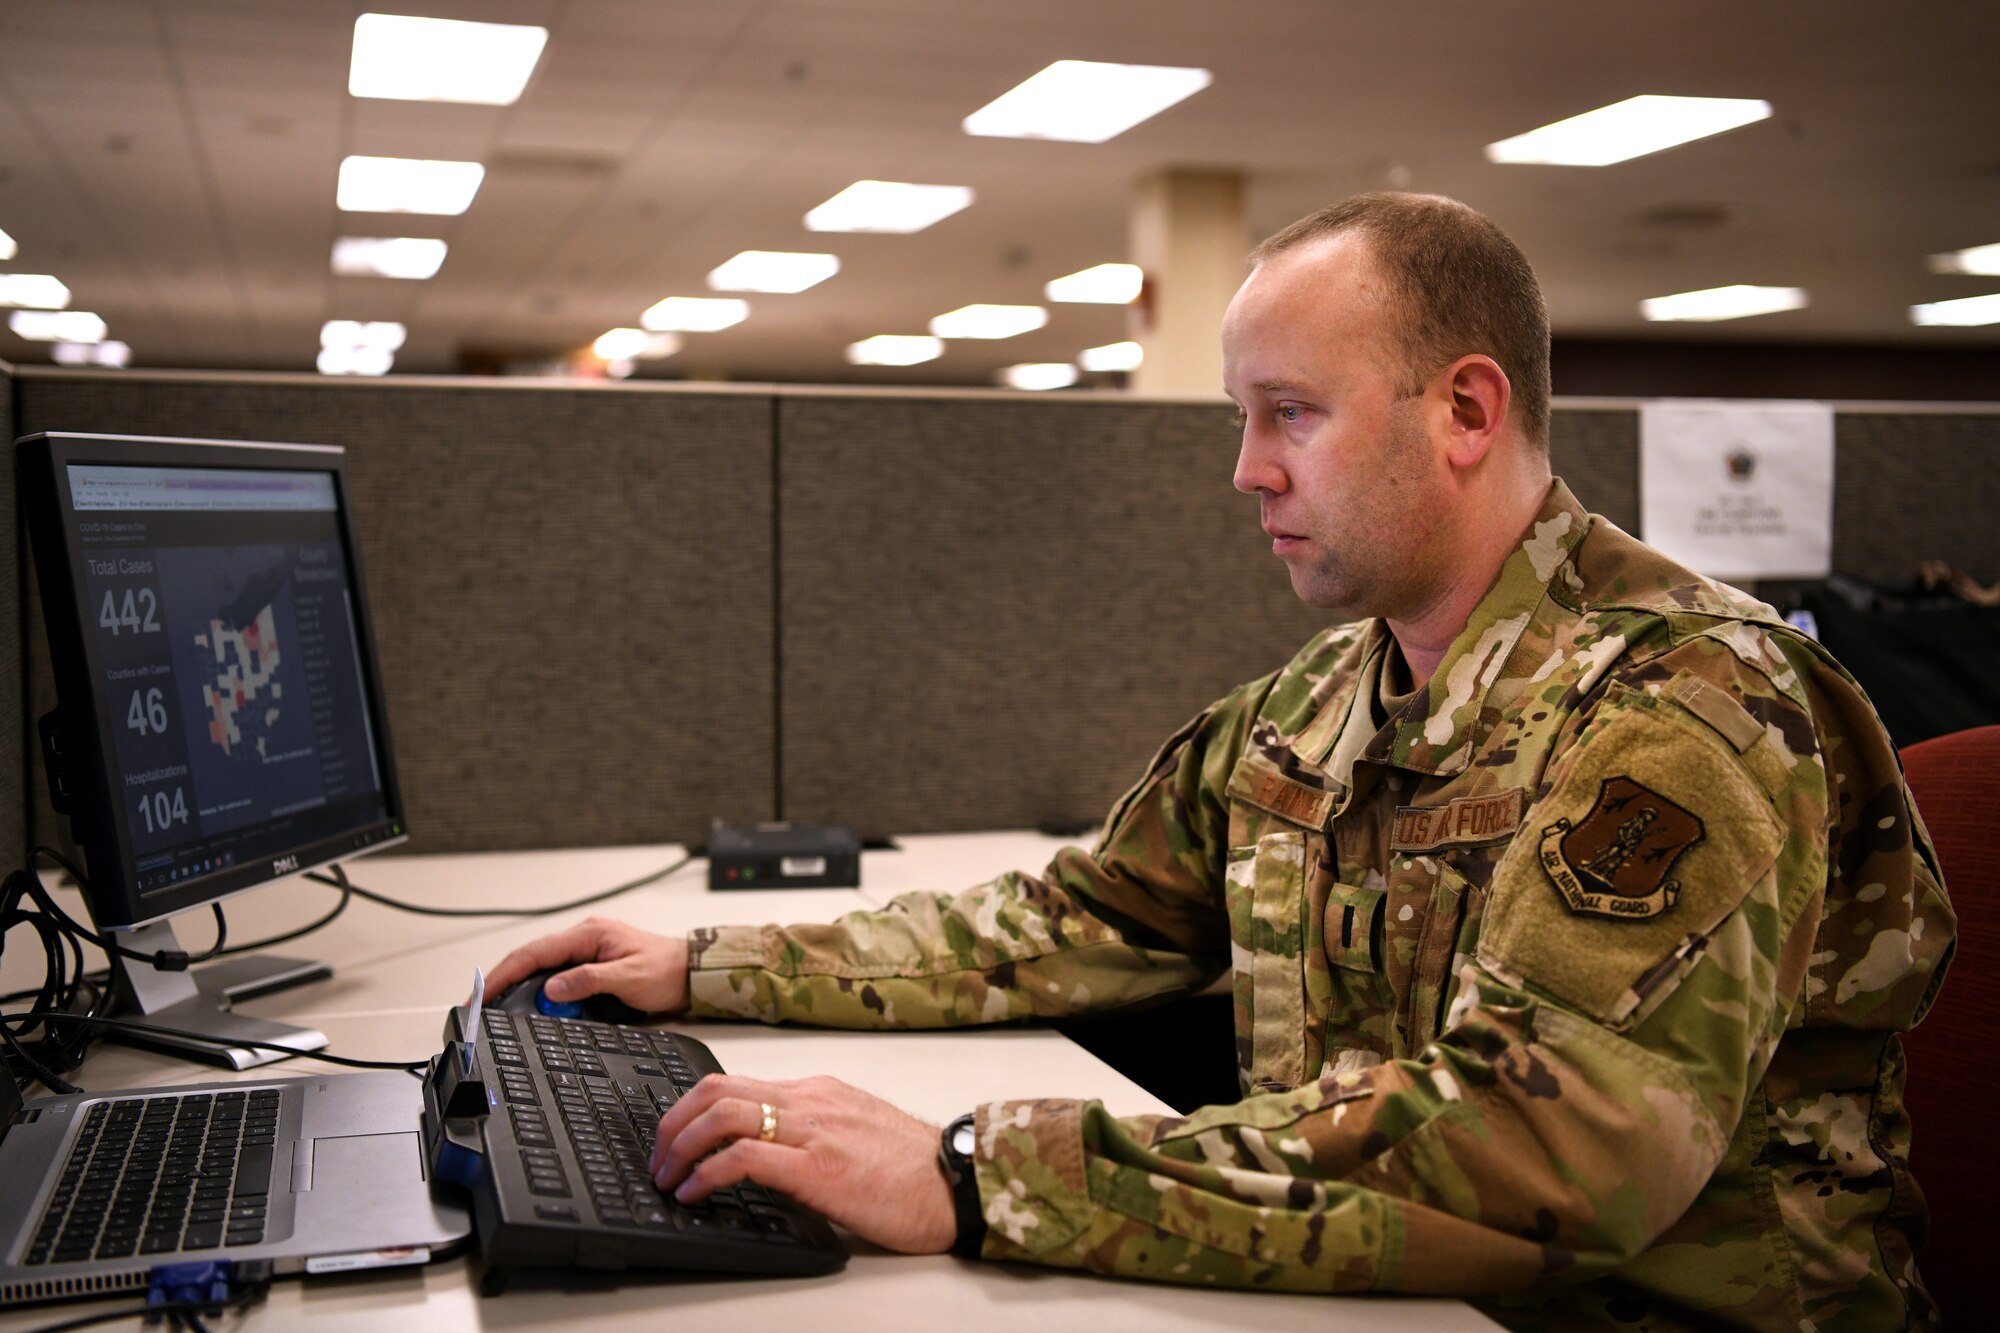 U.S. Air Force 1st Lt. Justin Rainier, a logistics readiness officer assigned to the 178th Wing who was called to State Active Duty and is currently serving on Joint Task Force-37 for Operation Steady Resolve, gathers weather reports for commanders March 23, 2020 at the Defense Supply Center in Columbus, Ohio. Rainier is one of more than 400 members of the Ohio National Guard called to support food distribution efforts at 12 locations across Ohio, serving more than 11 million Ohioans in all 88 counties. (U.S. Air National Guard photo by Tech. Sgt. Shane Hughes)